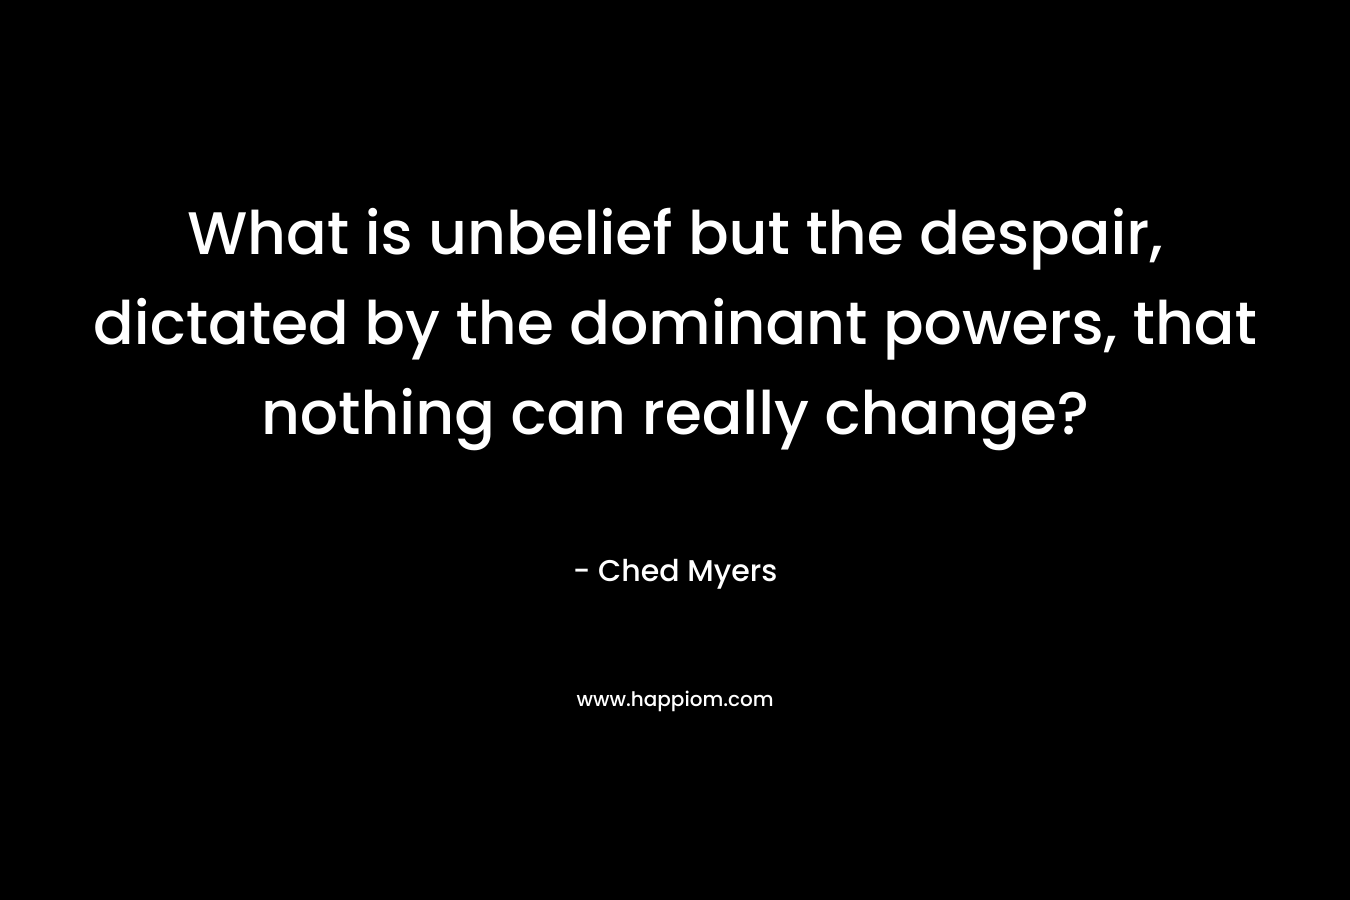 What is unbelief but the despair, dictated by the dominant powers, that nothing can really change? – Ched Myers